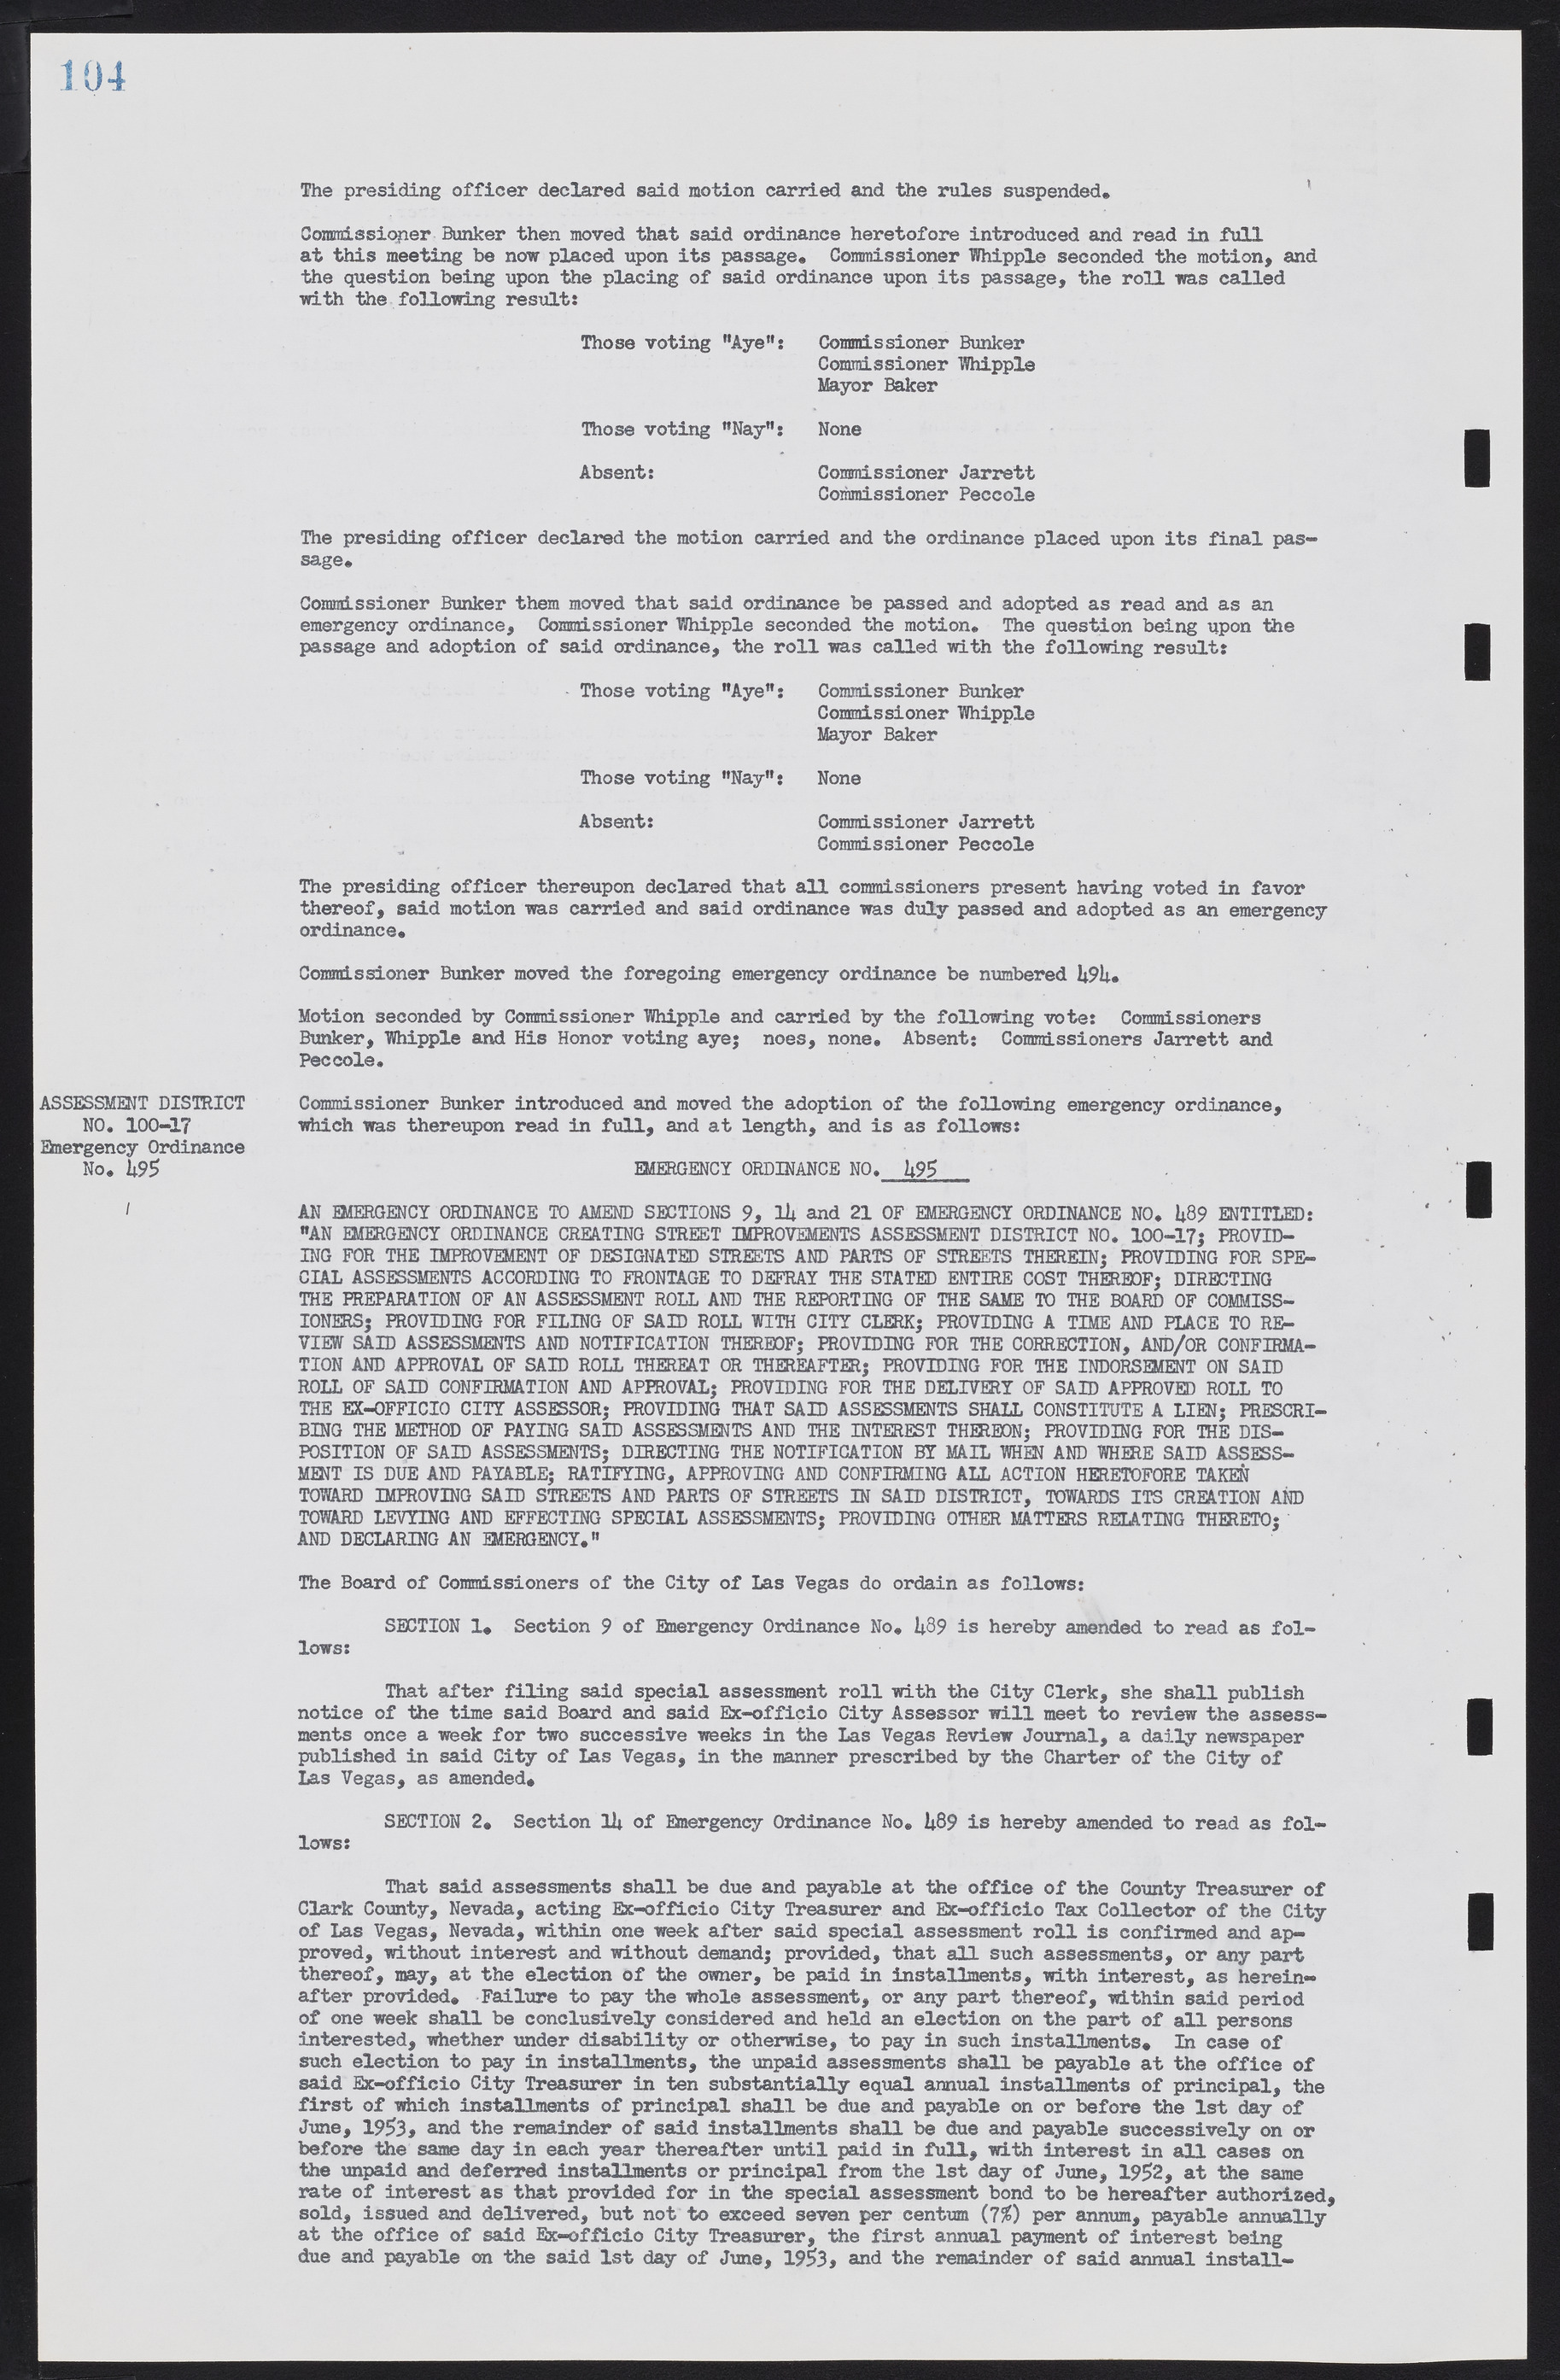 Las Vegas City Commission Minutes, May 26, 1952 to February 17, 1954, lvc000008-108